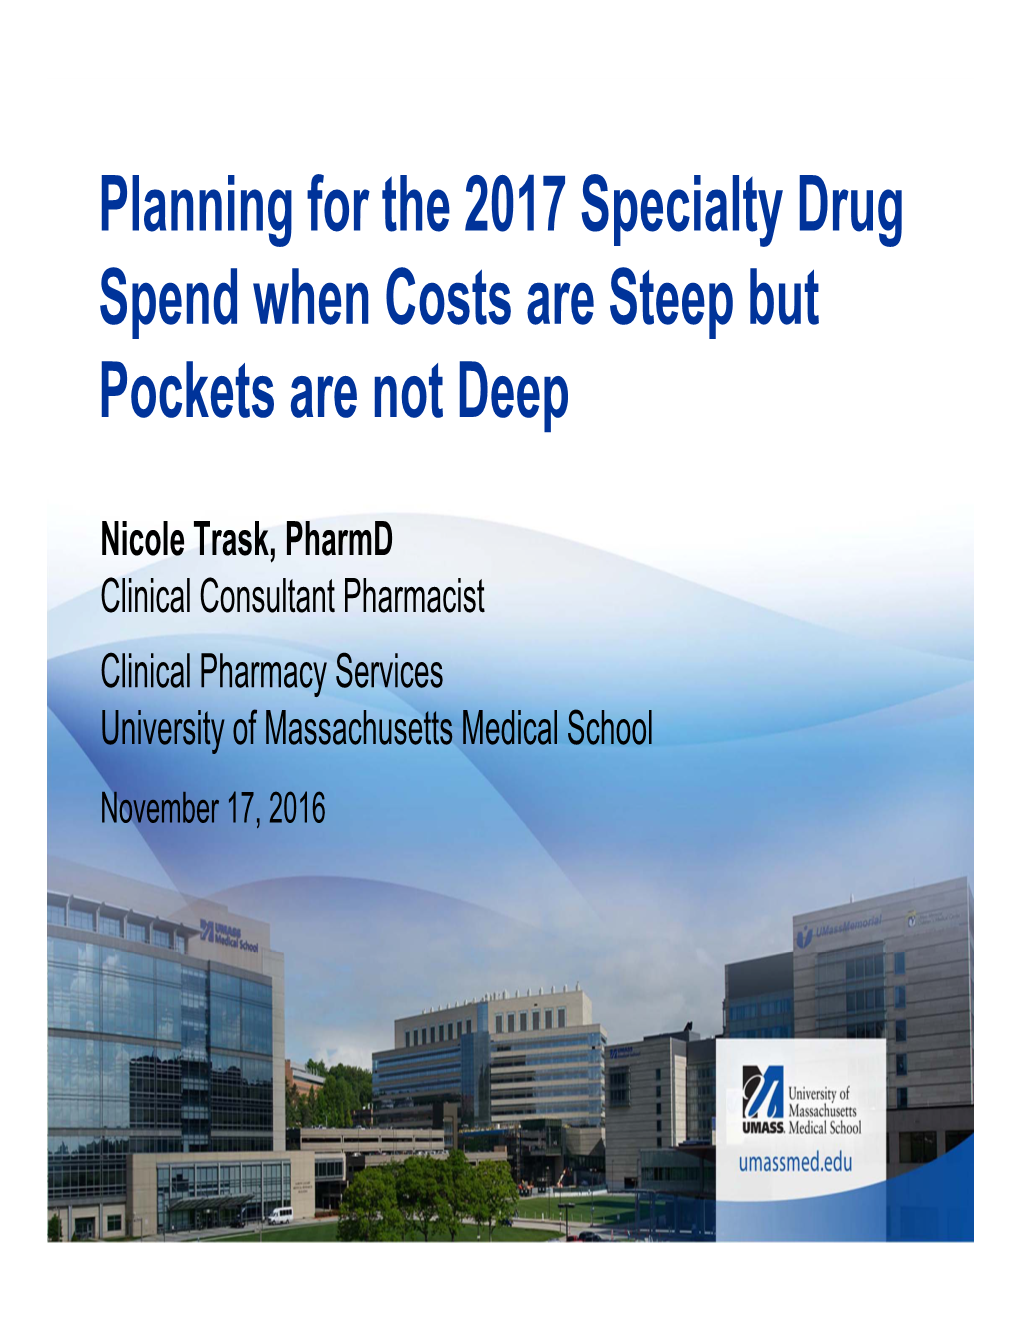 Planning for the 2017 Specialty Drug Spend When Costs Are Steep but Pockets Are Not Deep